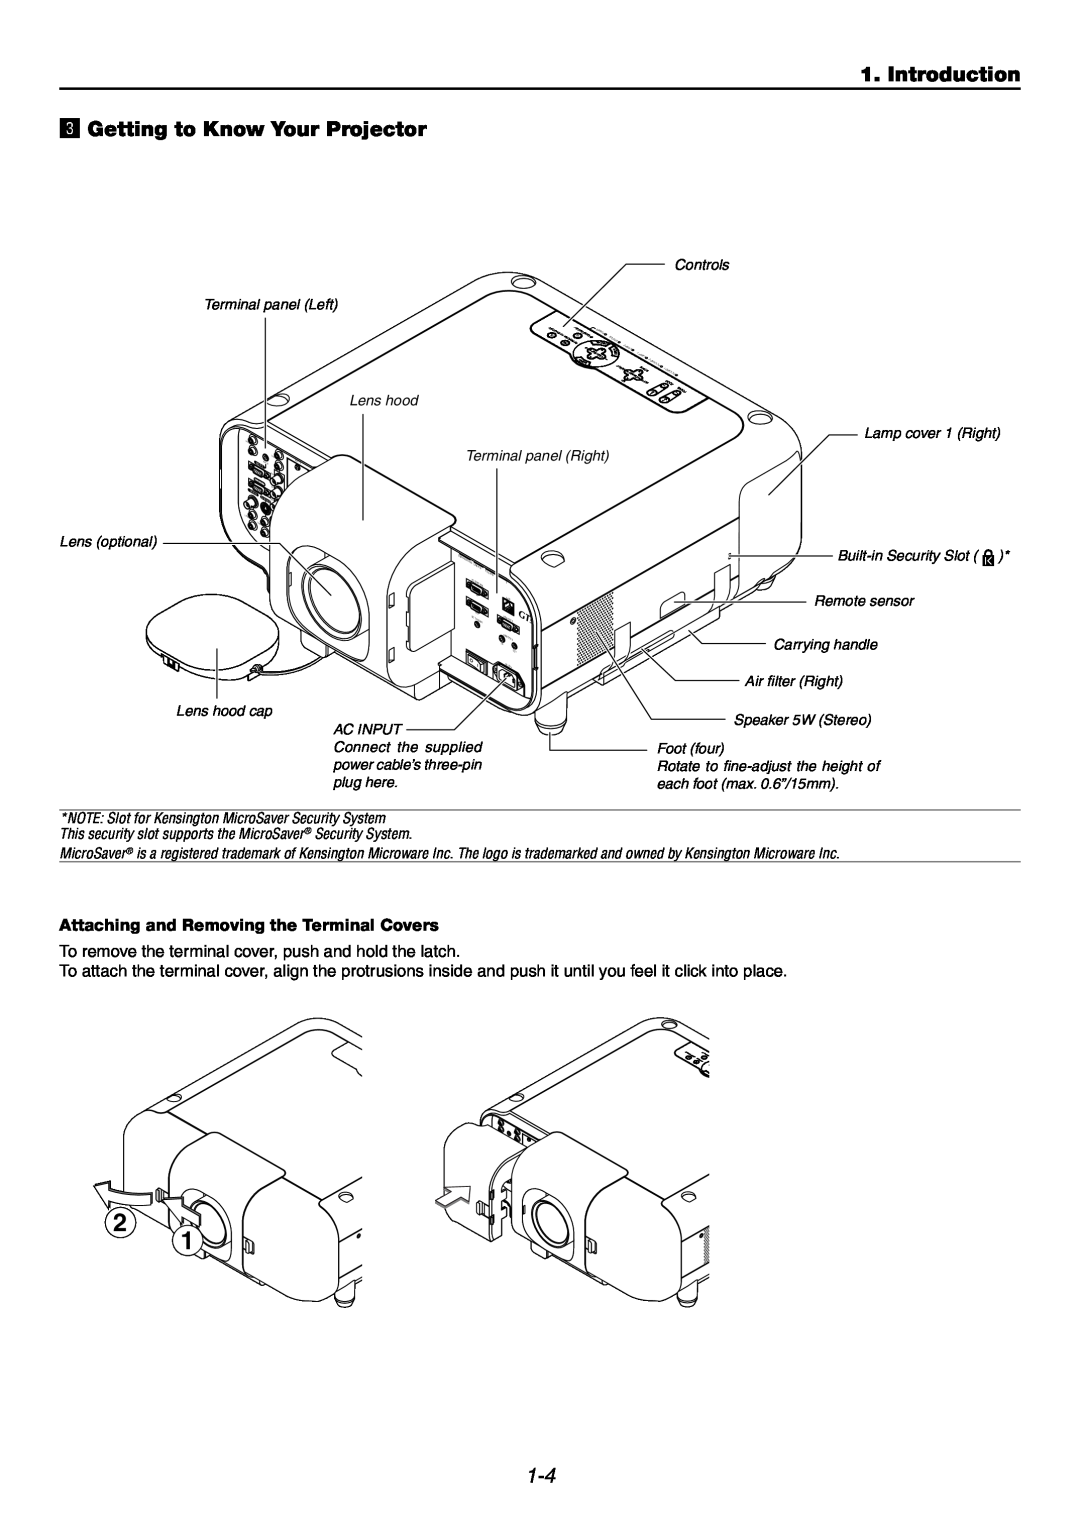 NEC GT6000 user manual Introduction c Getting to Know Your Projector, Attaching and Removing the Terminal Covers 